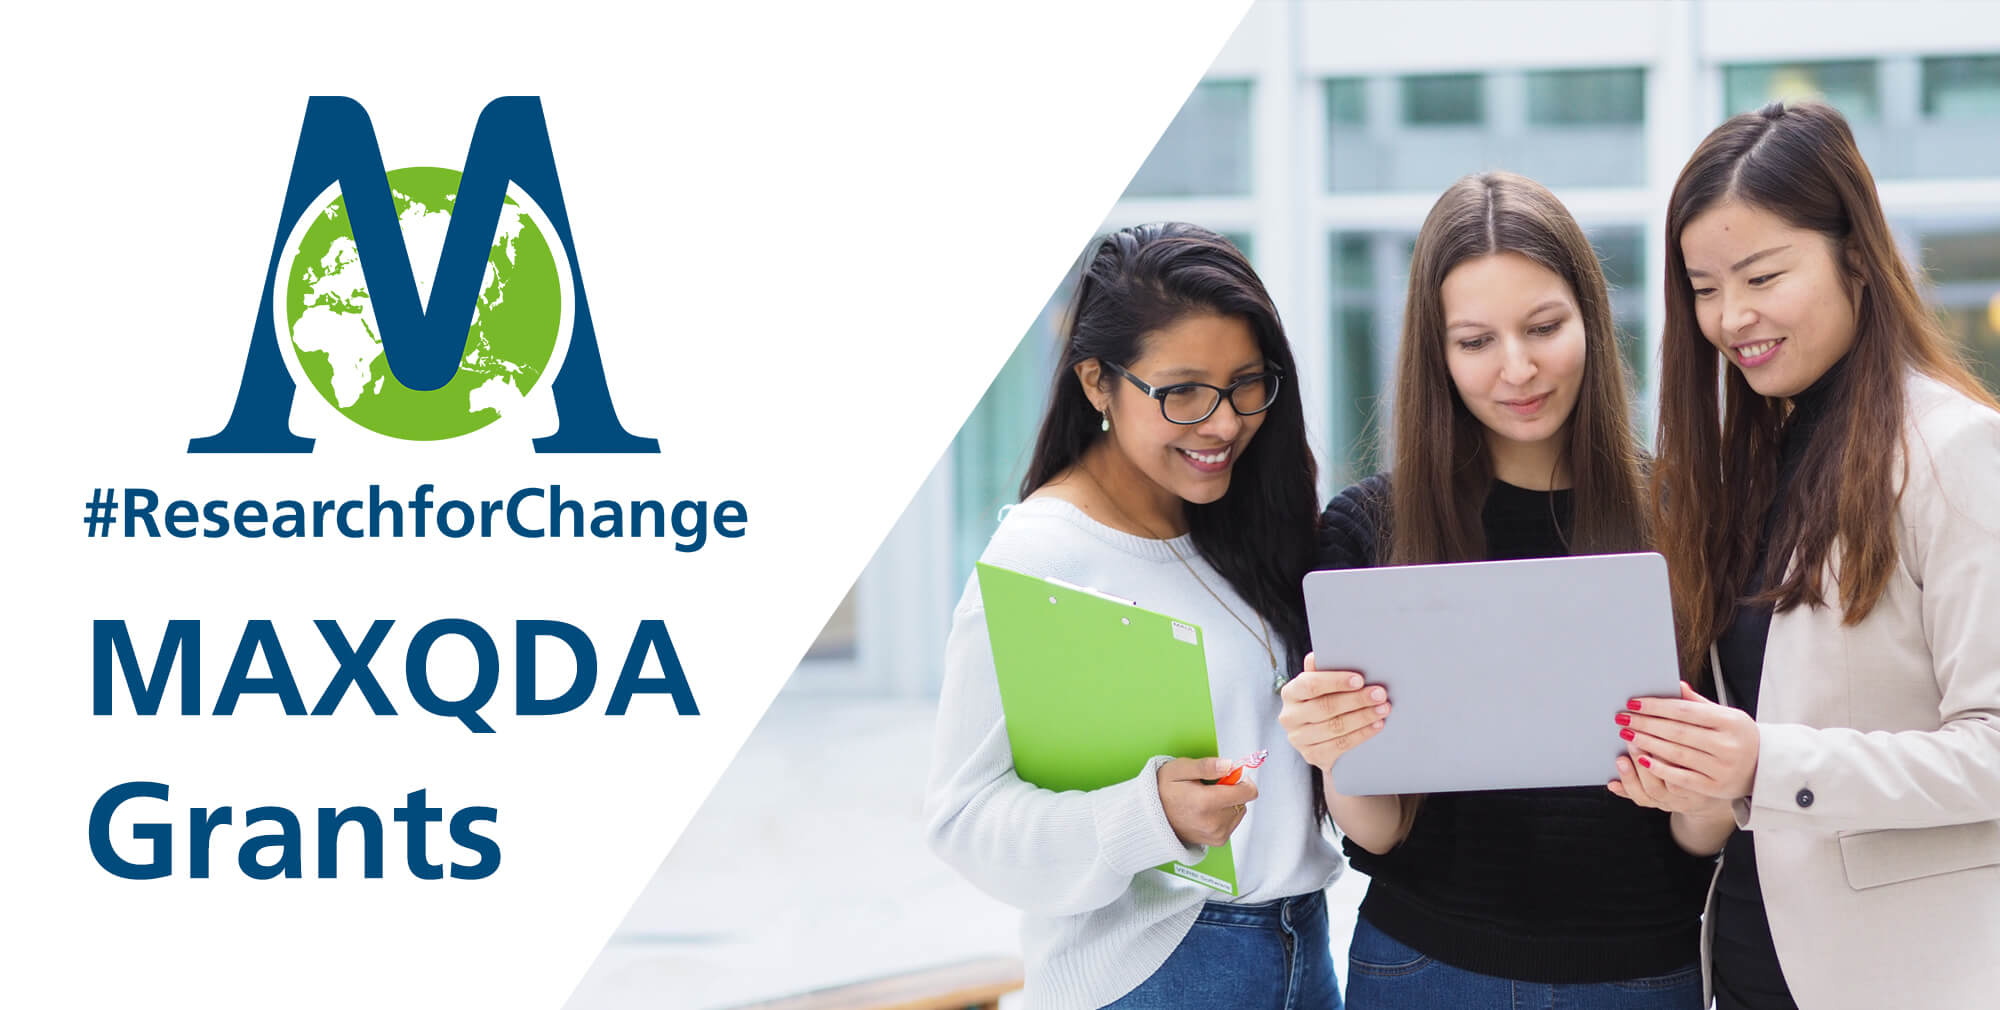 MAXQDA #ResearchforChange Grant 2019 (Approximately $1,400 USD)